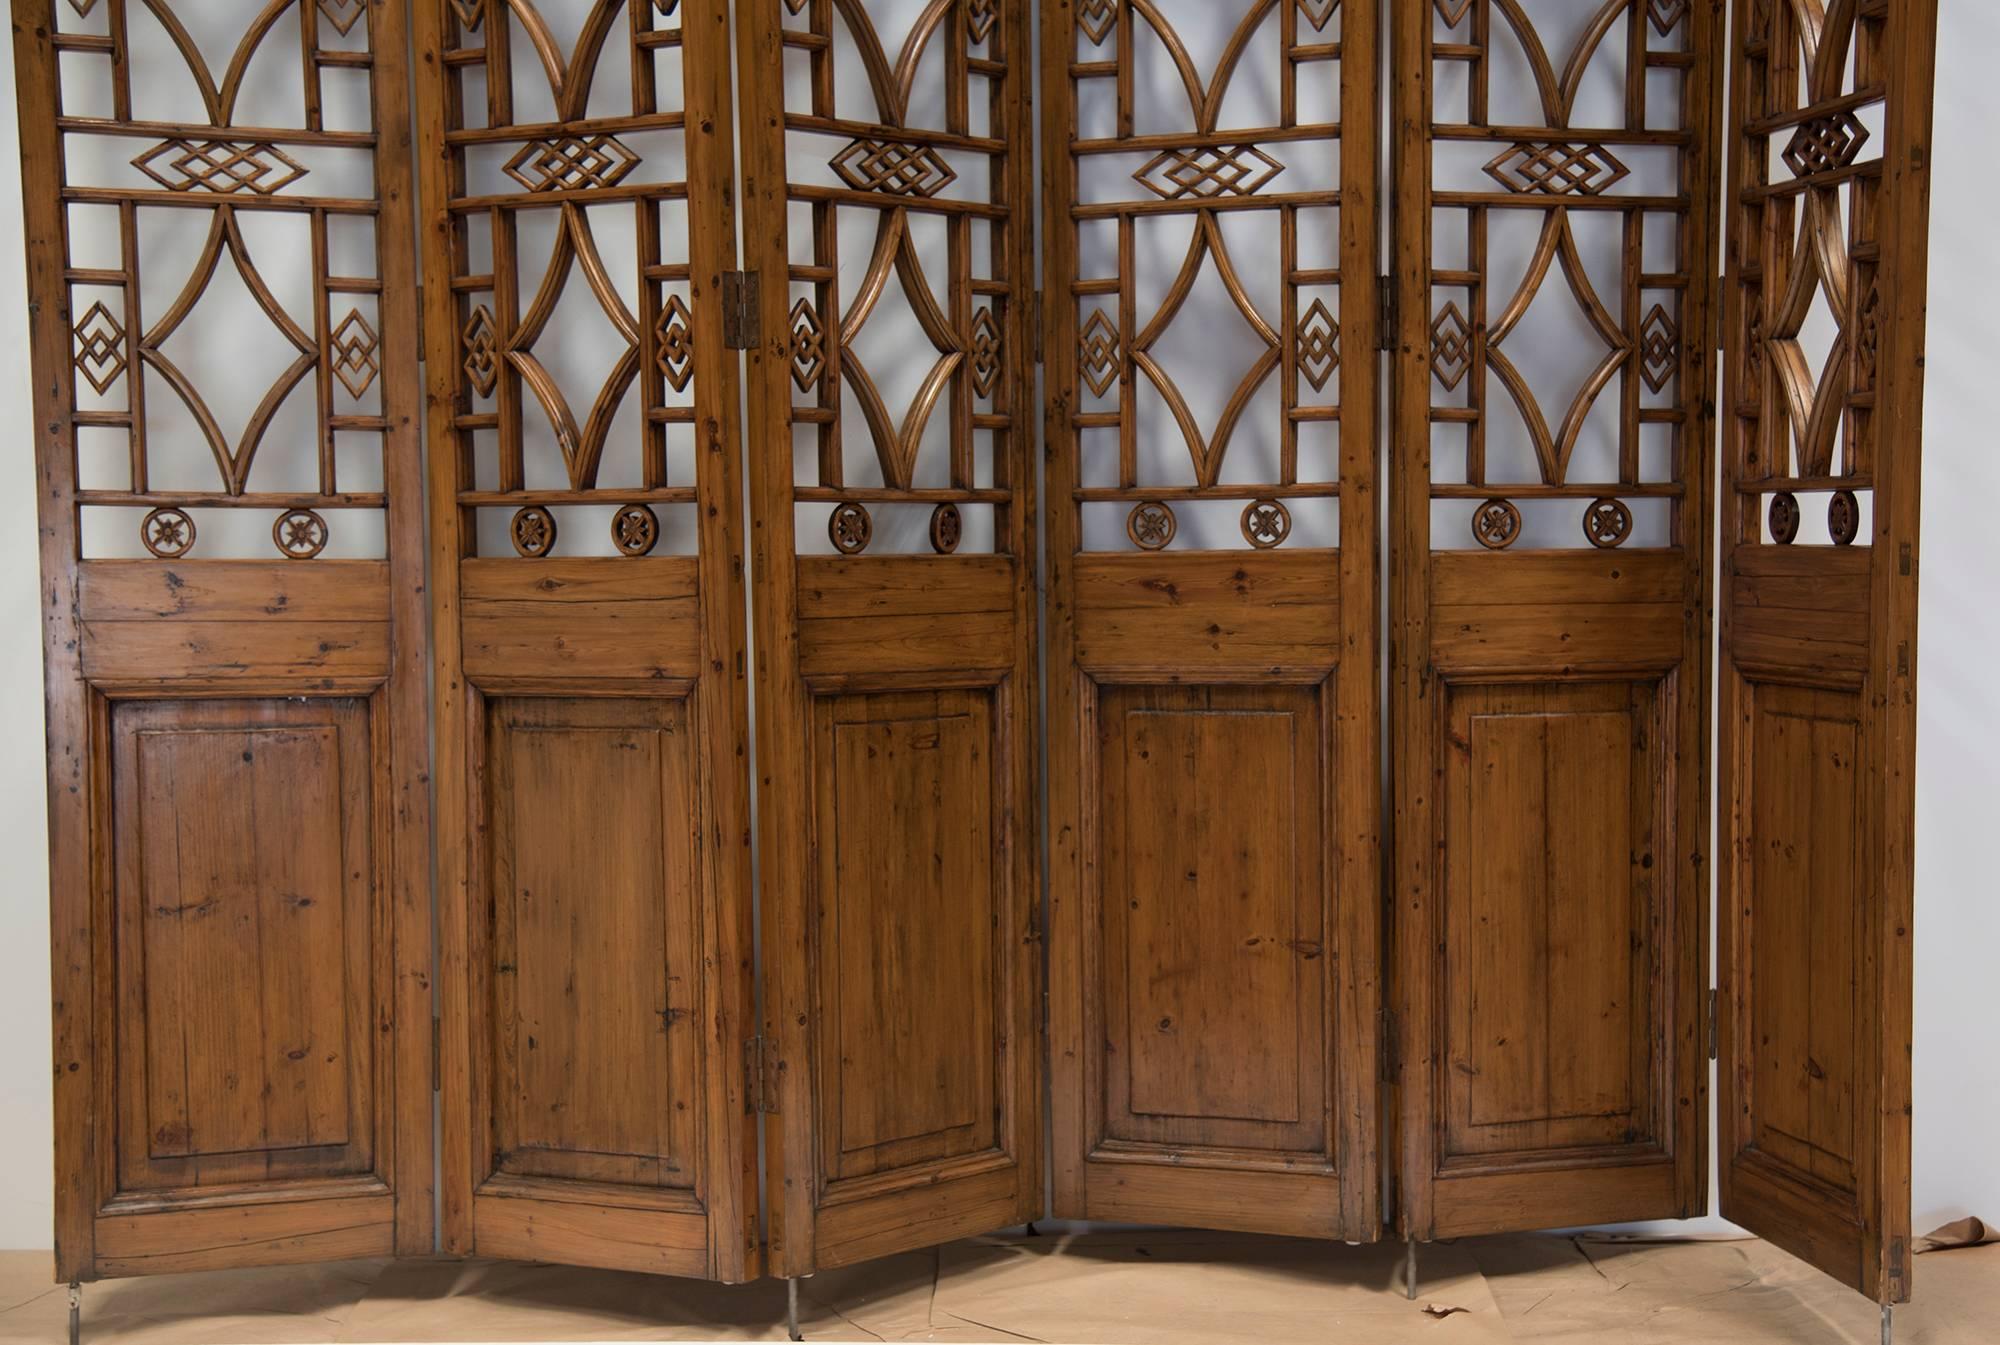 Chinese CHINESE 6-PANEL Sculptured Wooden SCREEN For Sale